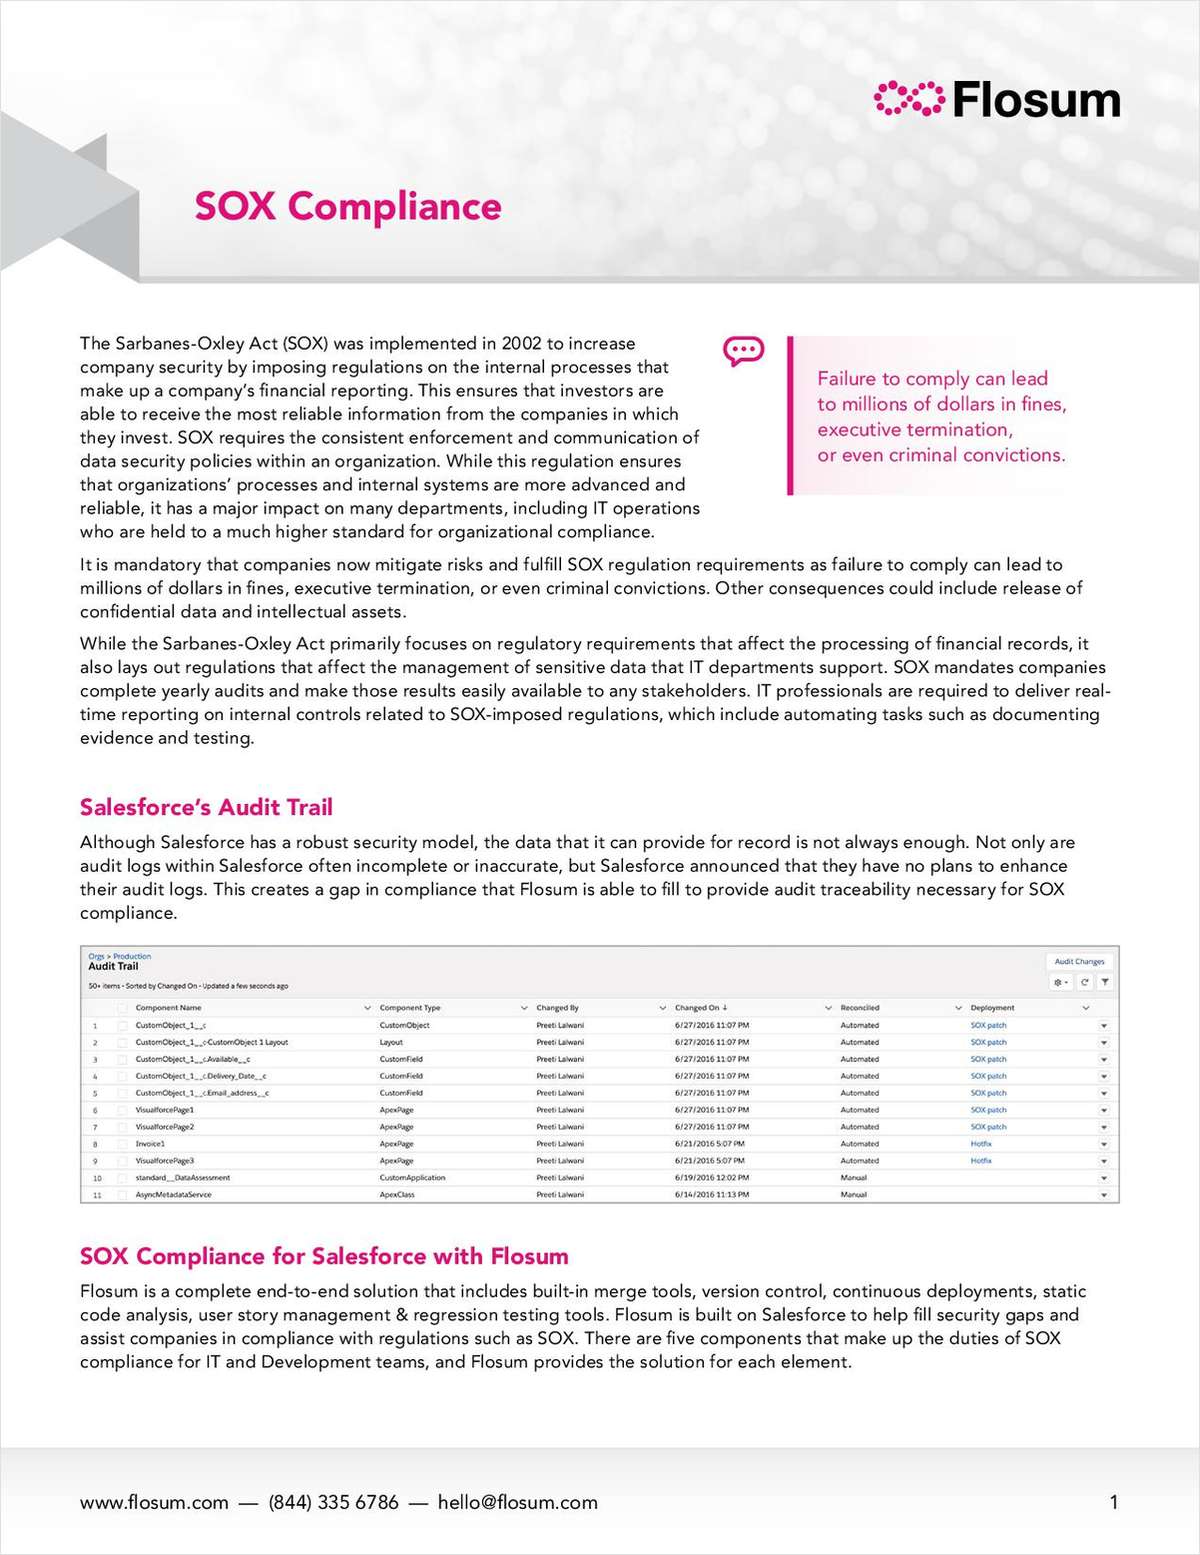 Compliance in Release Management and Data Management